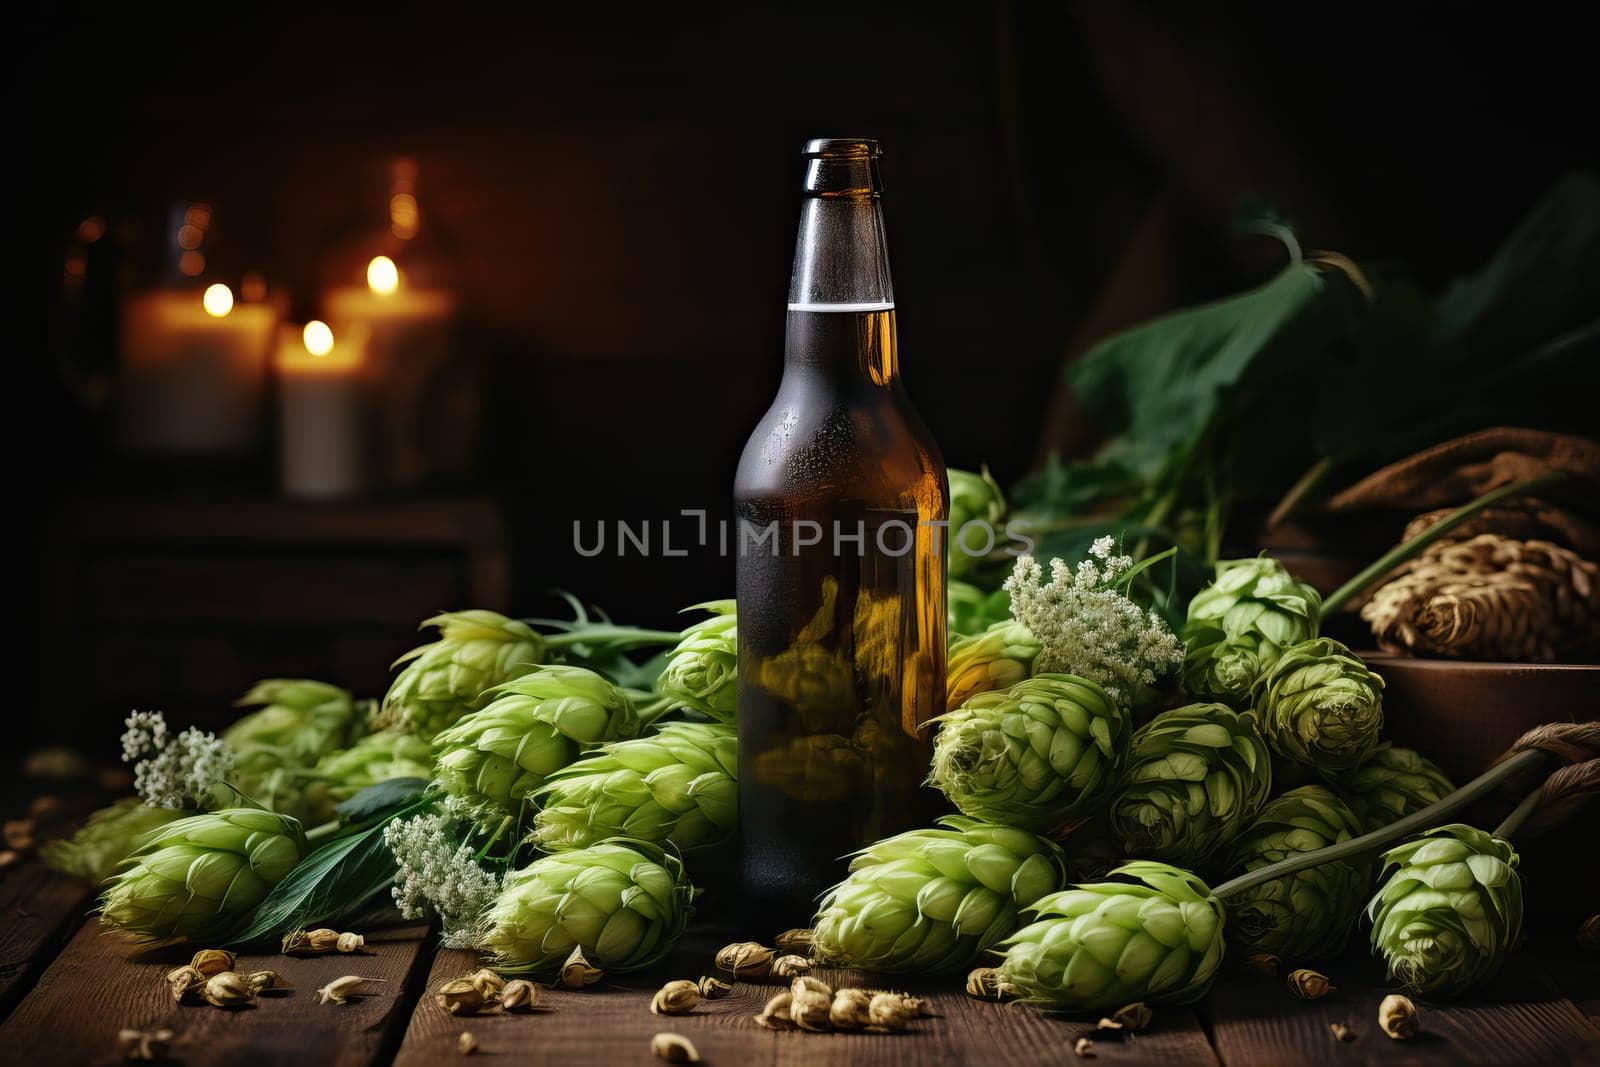 A bottle of beer and a glass of beer with foam on a wooden background with green hops.